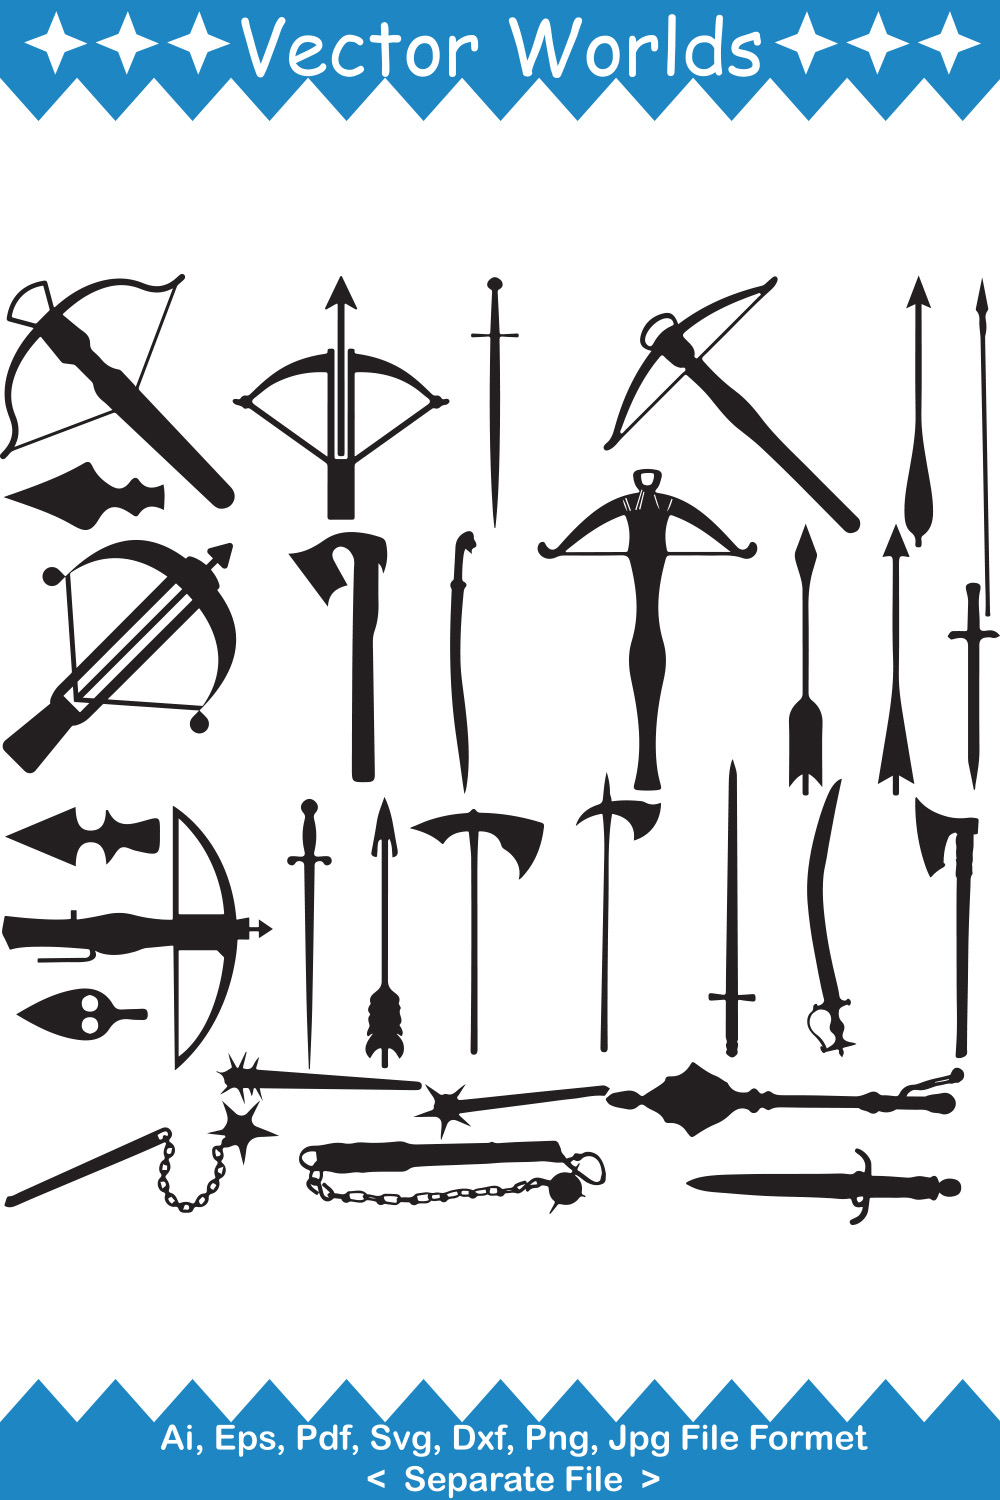 A set of unique images of silhouettes of old edged weapons